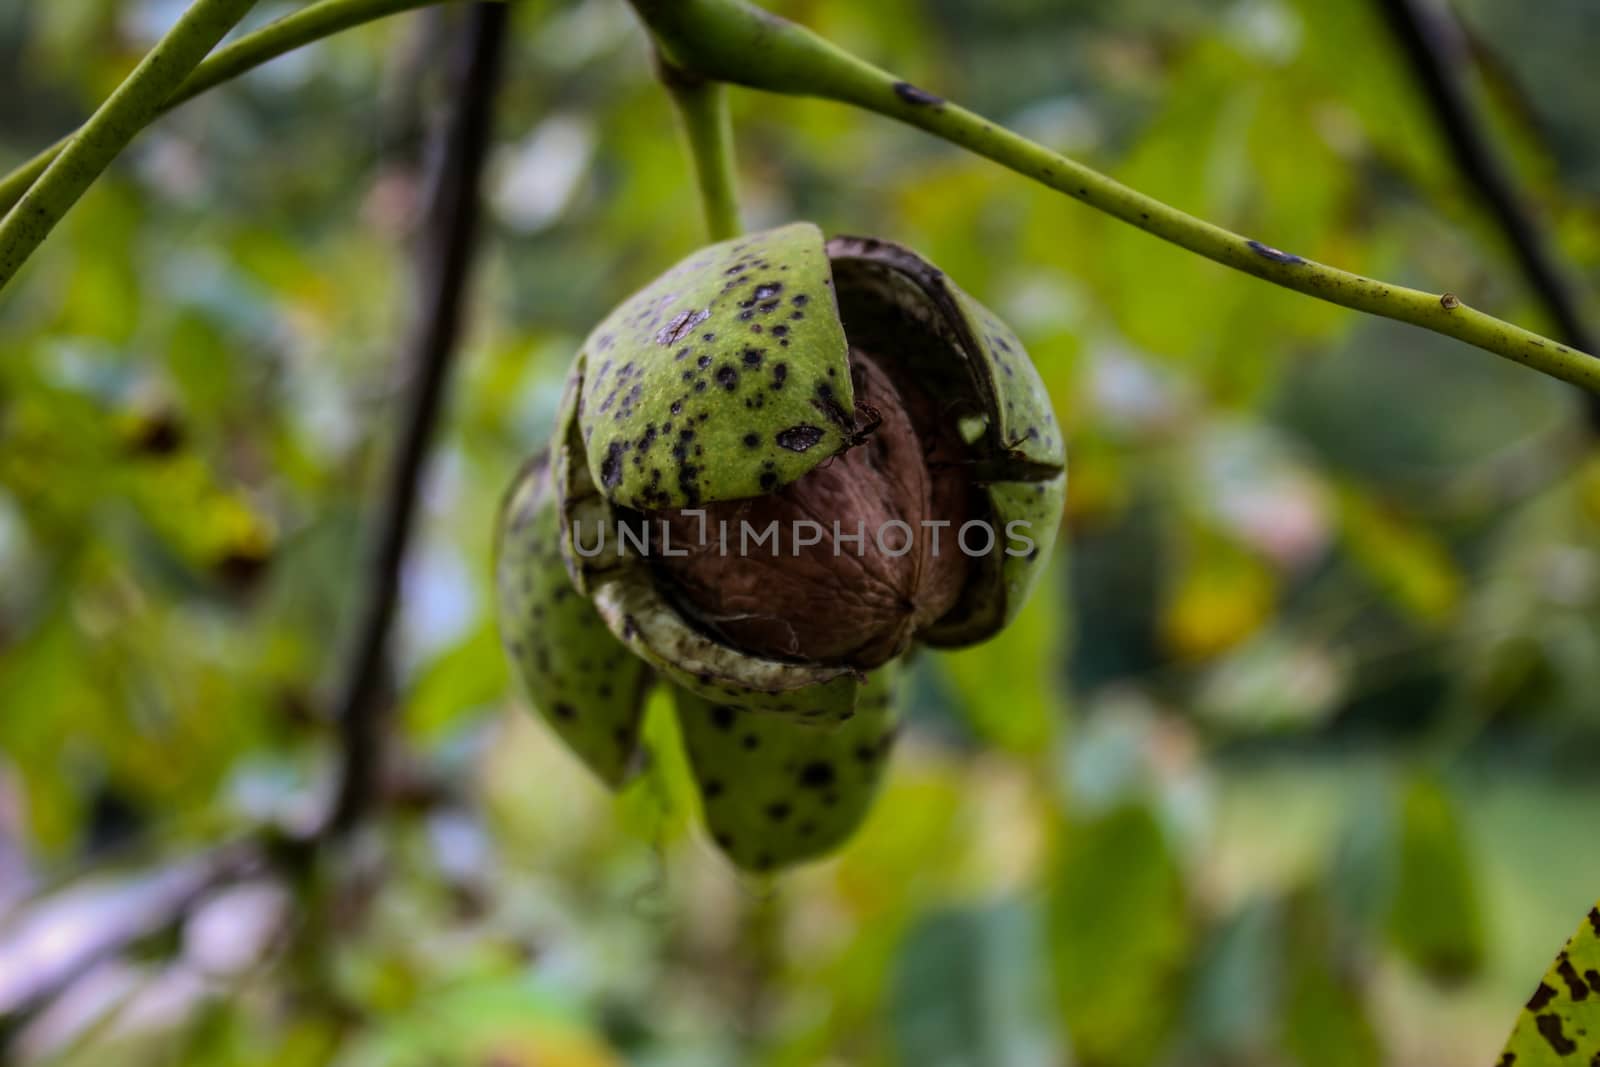 A cracked green shell from which a walnut can be seen. Walnut on a branch. by mahirrov